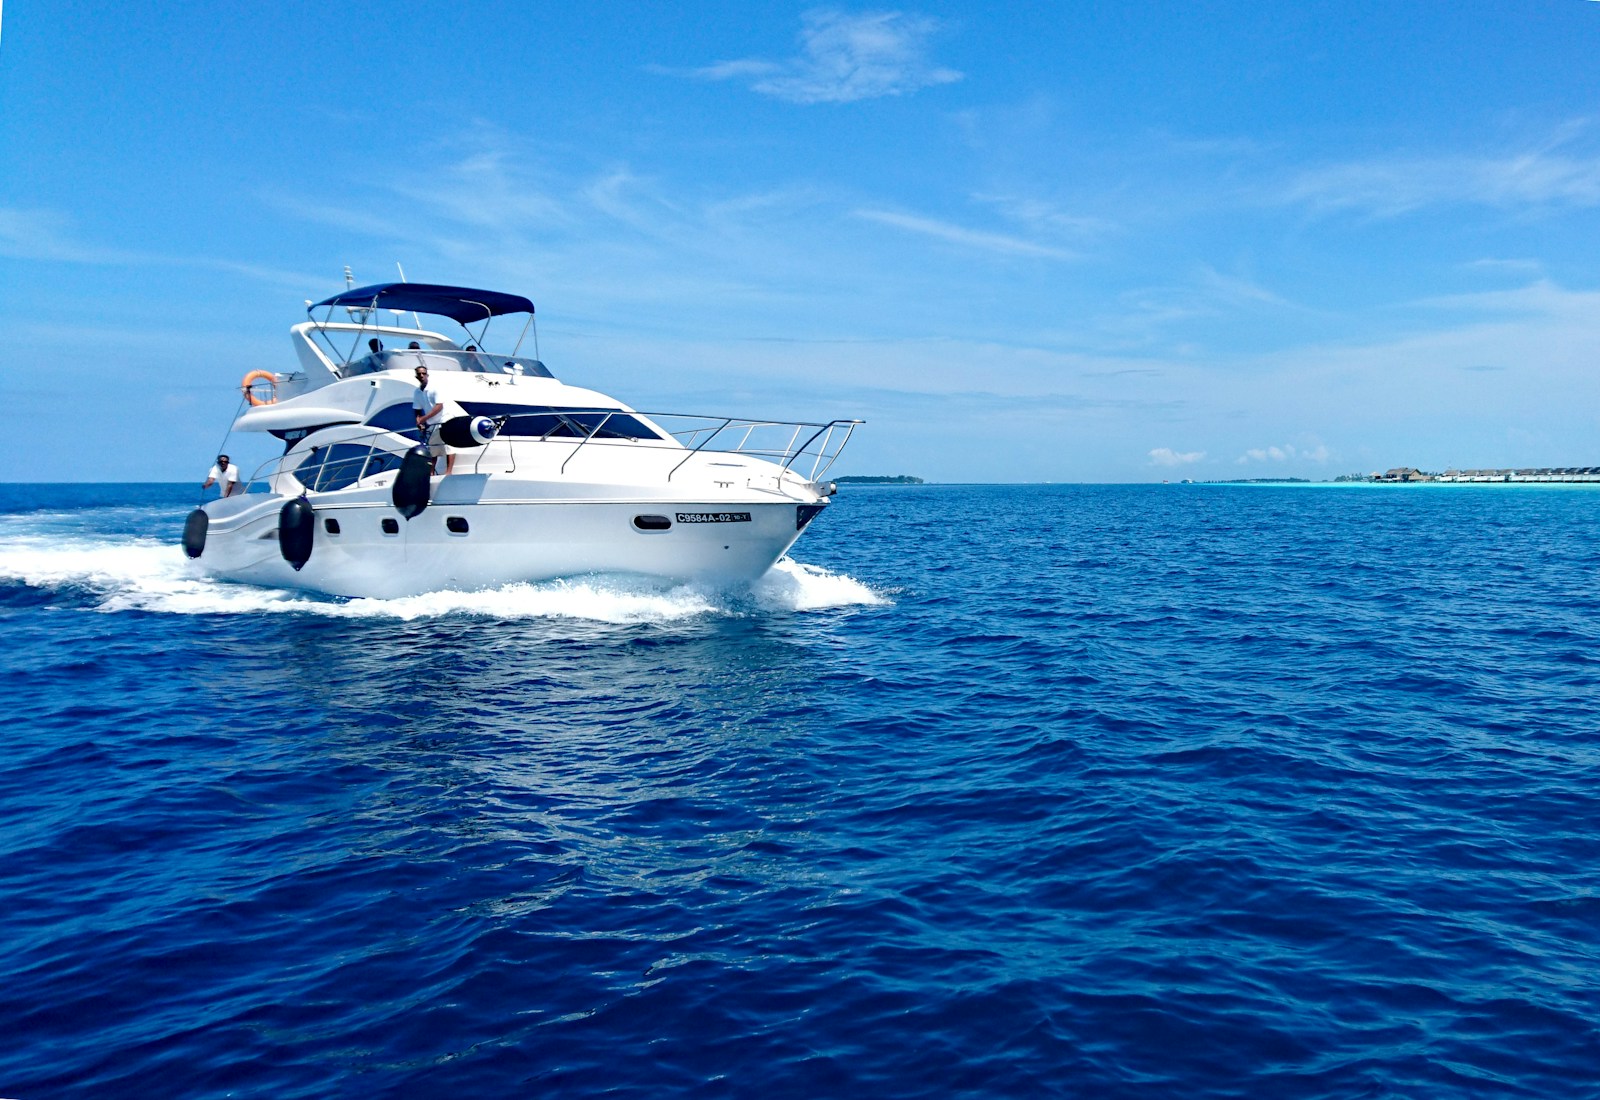 Boat Insurance and Natural Disasters: What’s Covered?